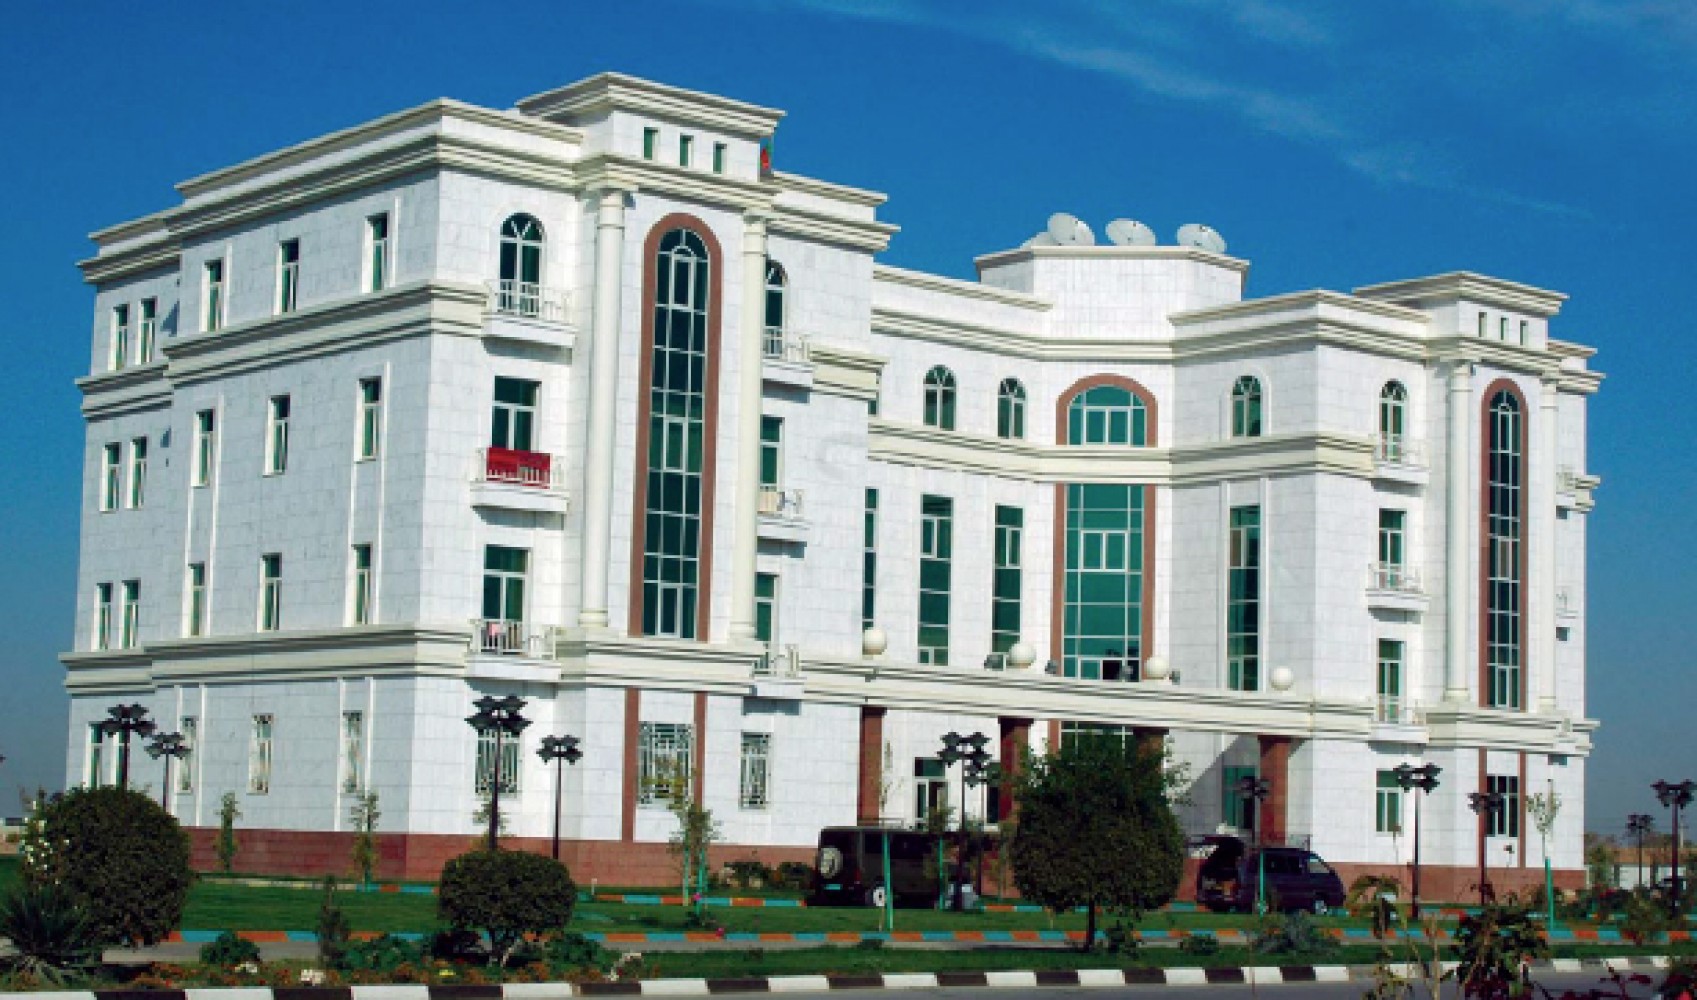 The Houses of Turkmenistan Ministry of Internal Affairs